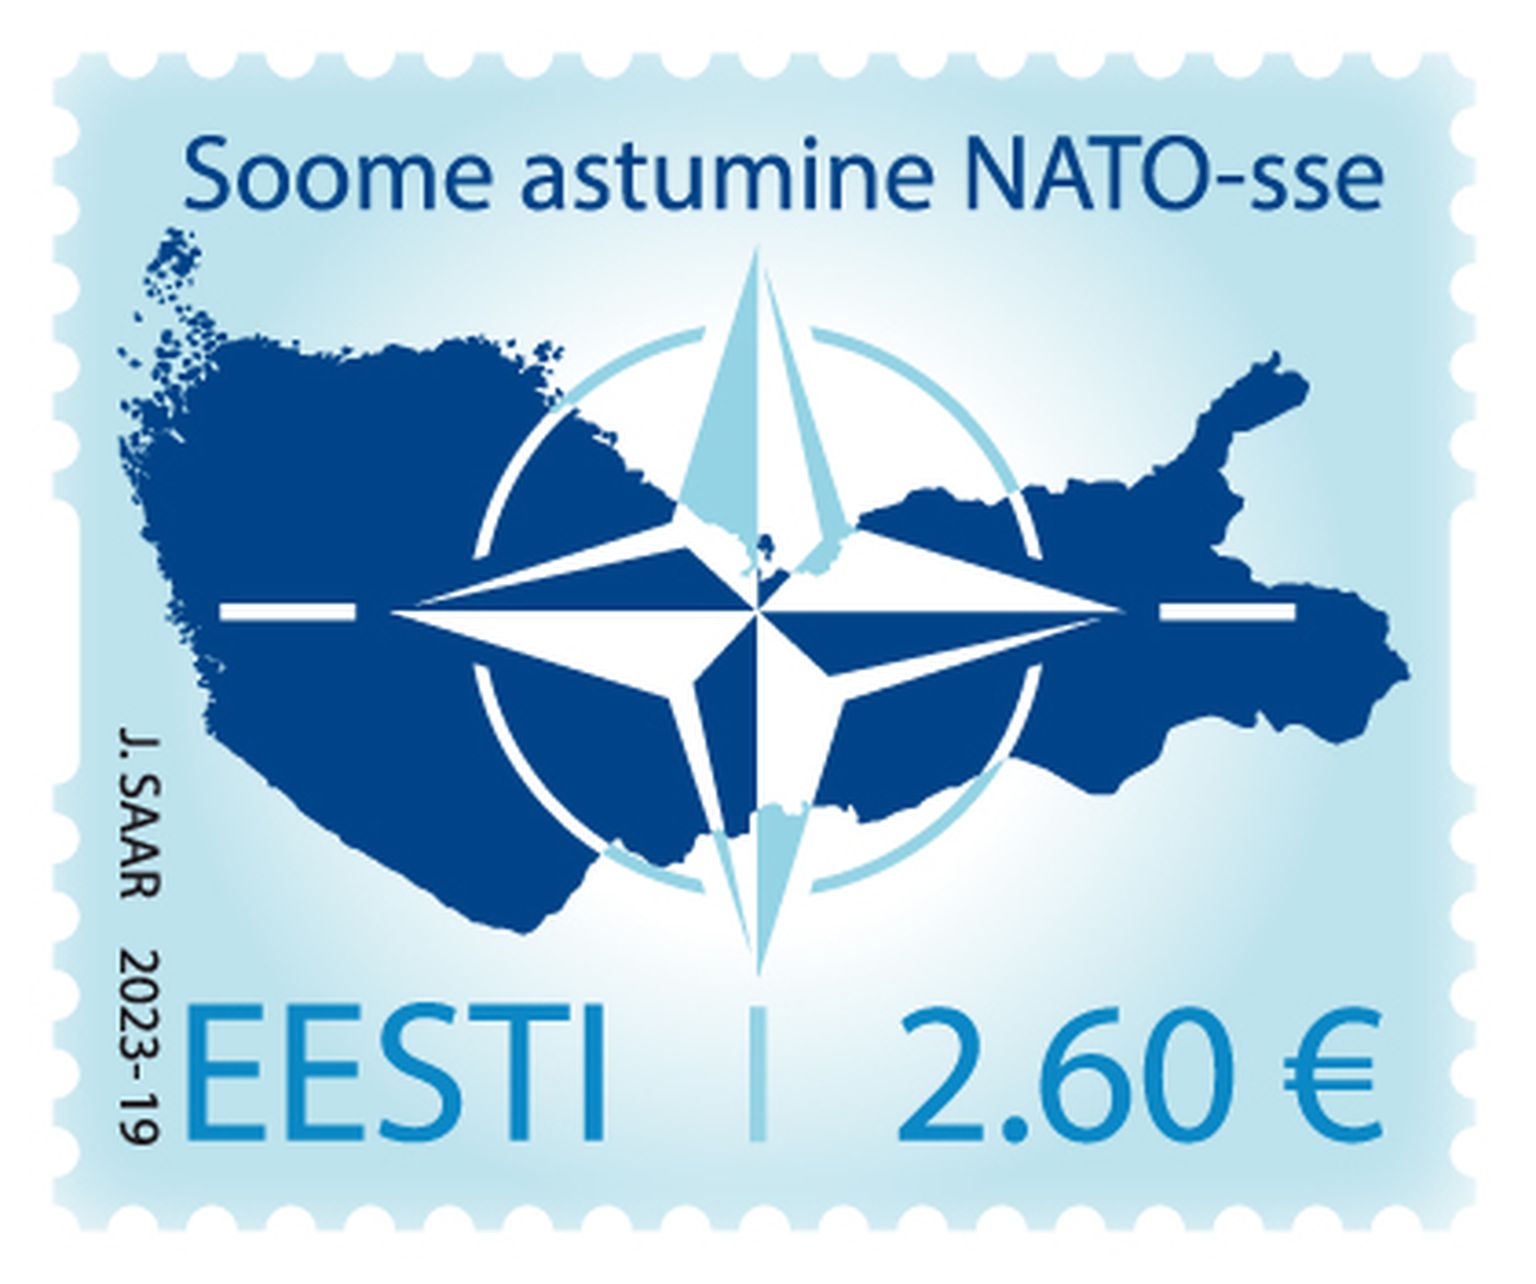 Omniva releases stamp in honor of Finland's accession to NATO.